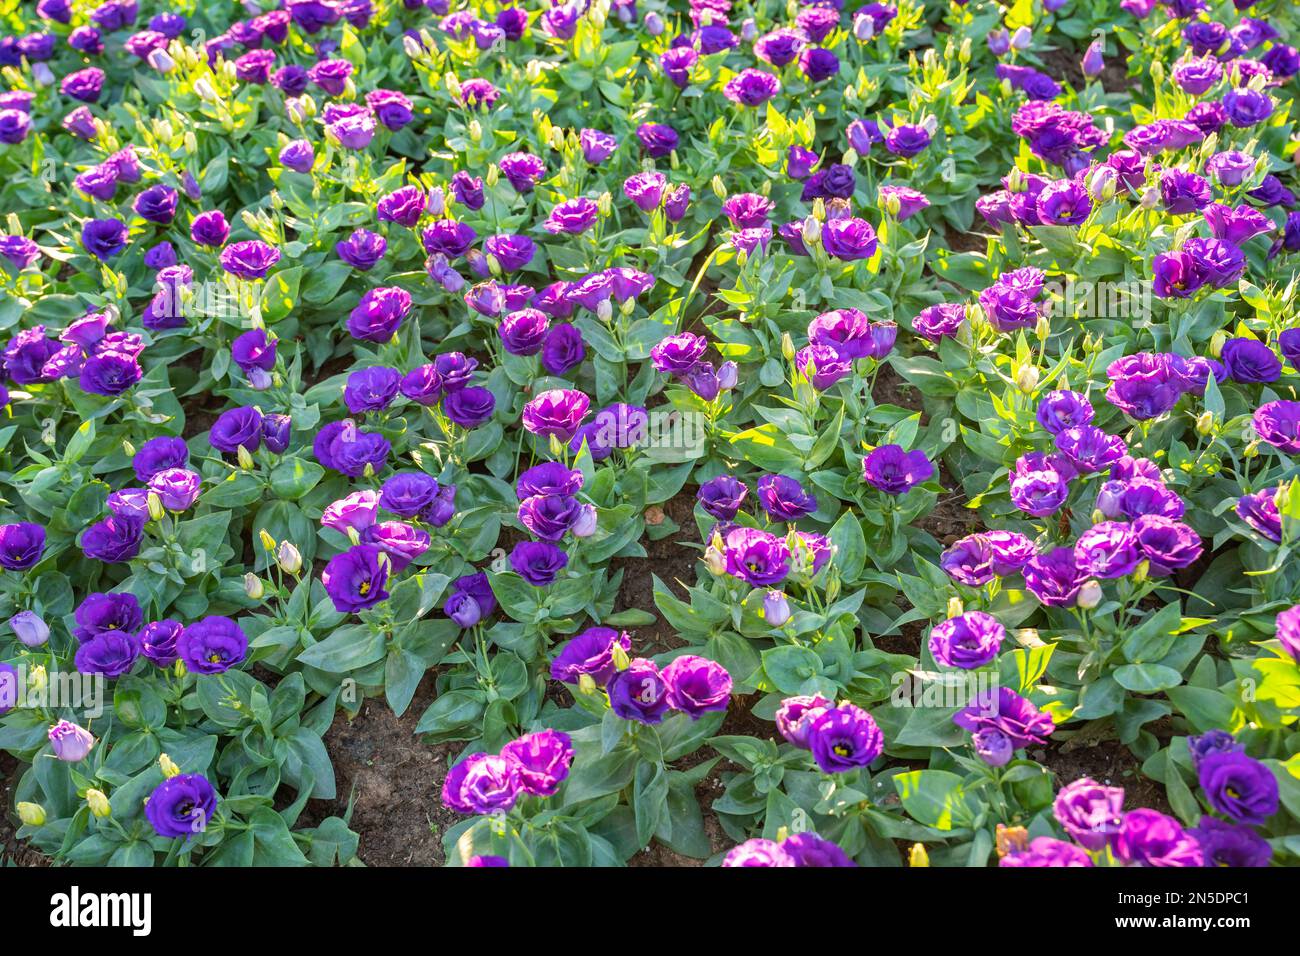 Violet Lisianthus flower in a garden with sunlight. Stock Photo